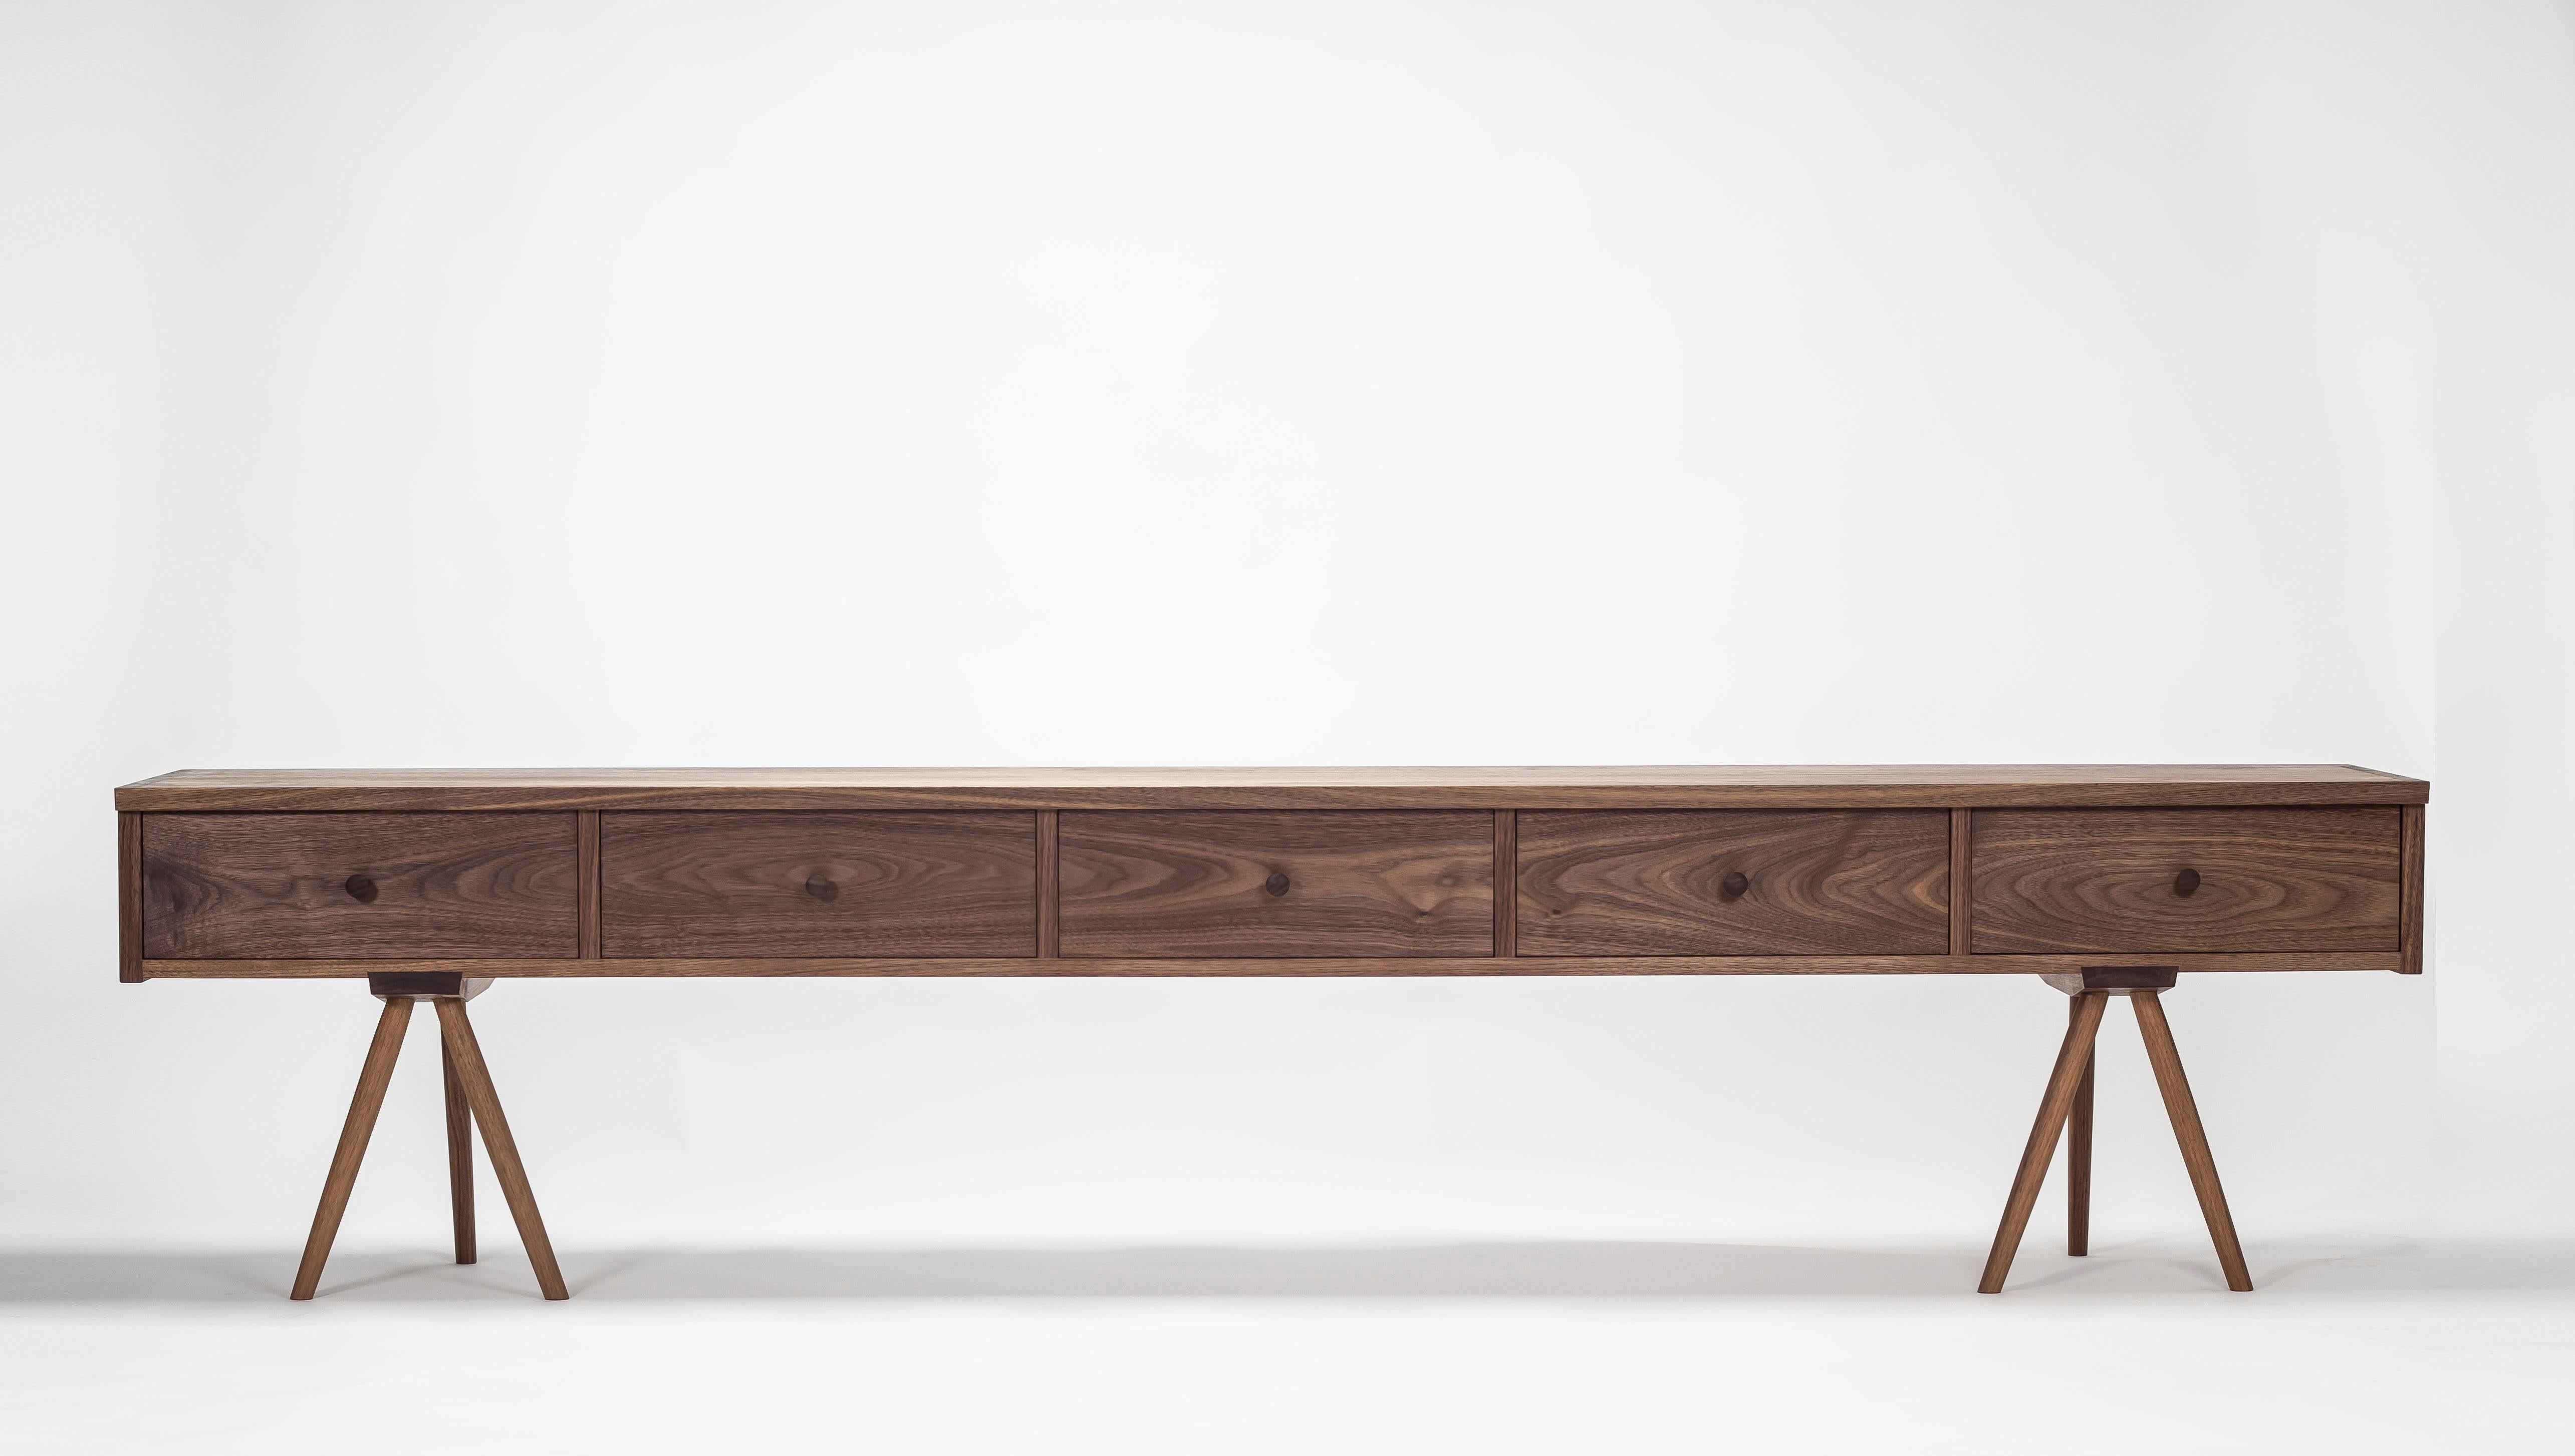 A solid black walnut sideboard/credenza with drawer bottoms made of solid oak or maple. It is made by Master craftsman and artist Frank Buschmann with great attention to detail, such as having the drawer fronts made from a single piece to ensure a